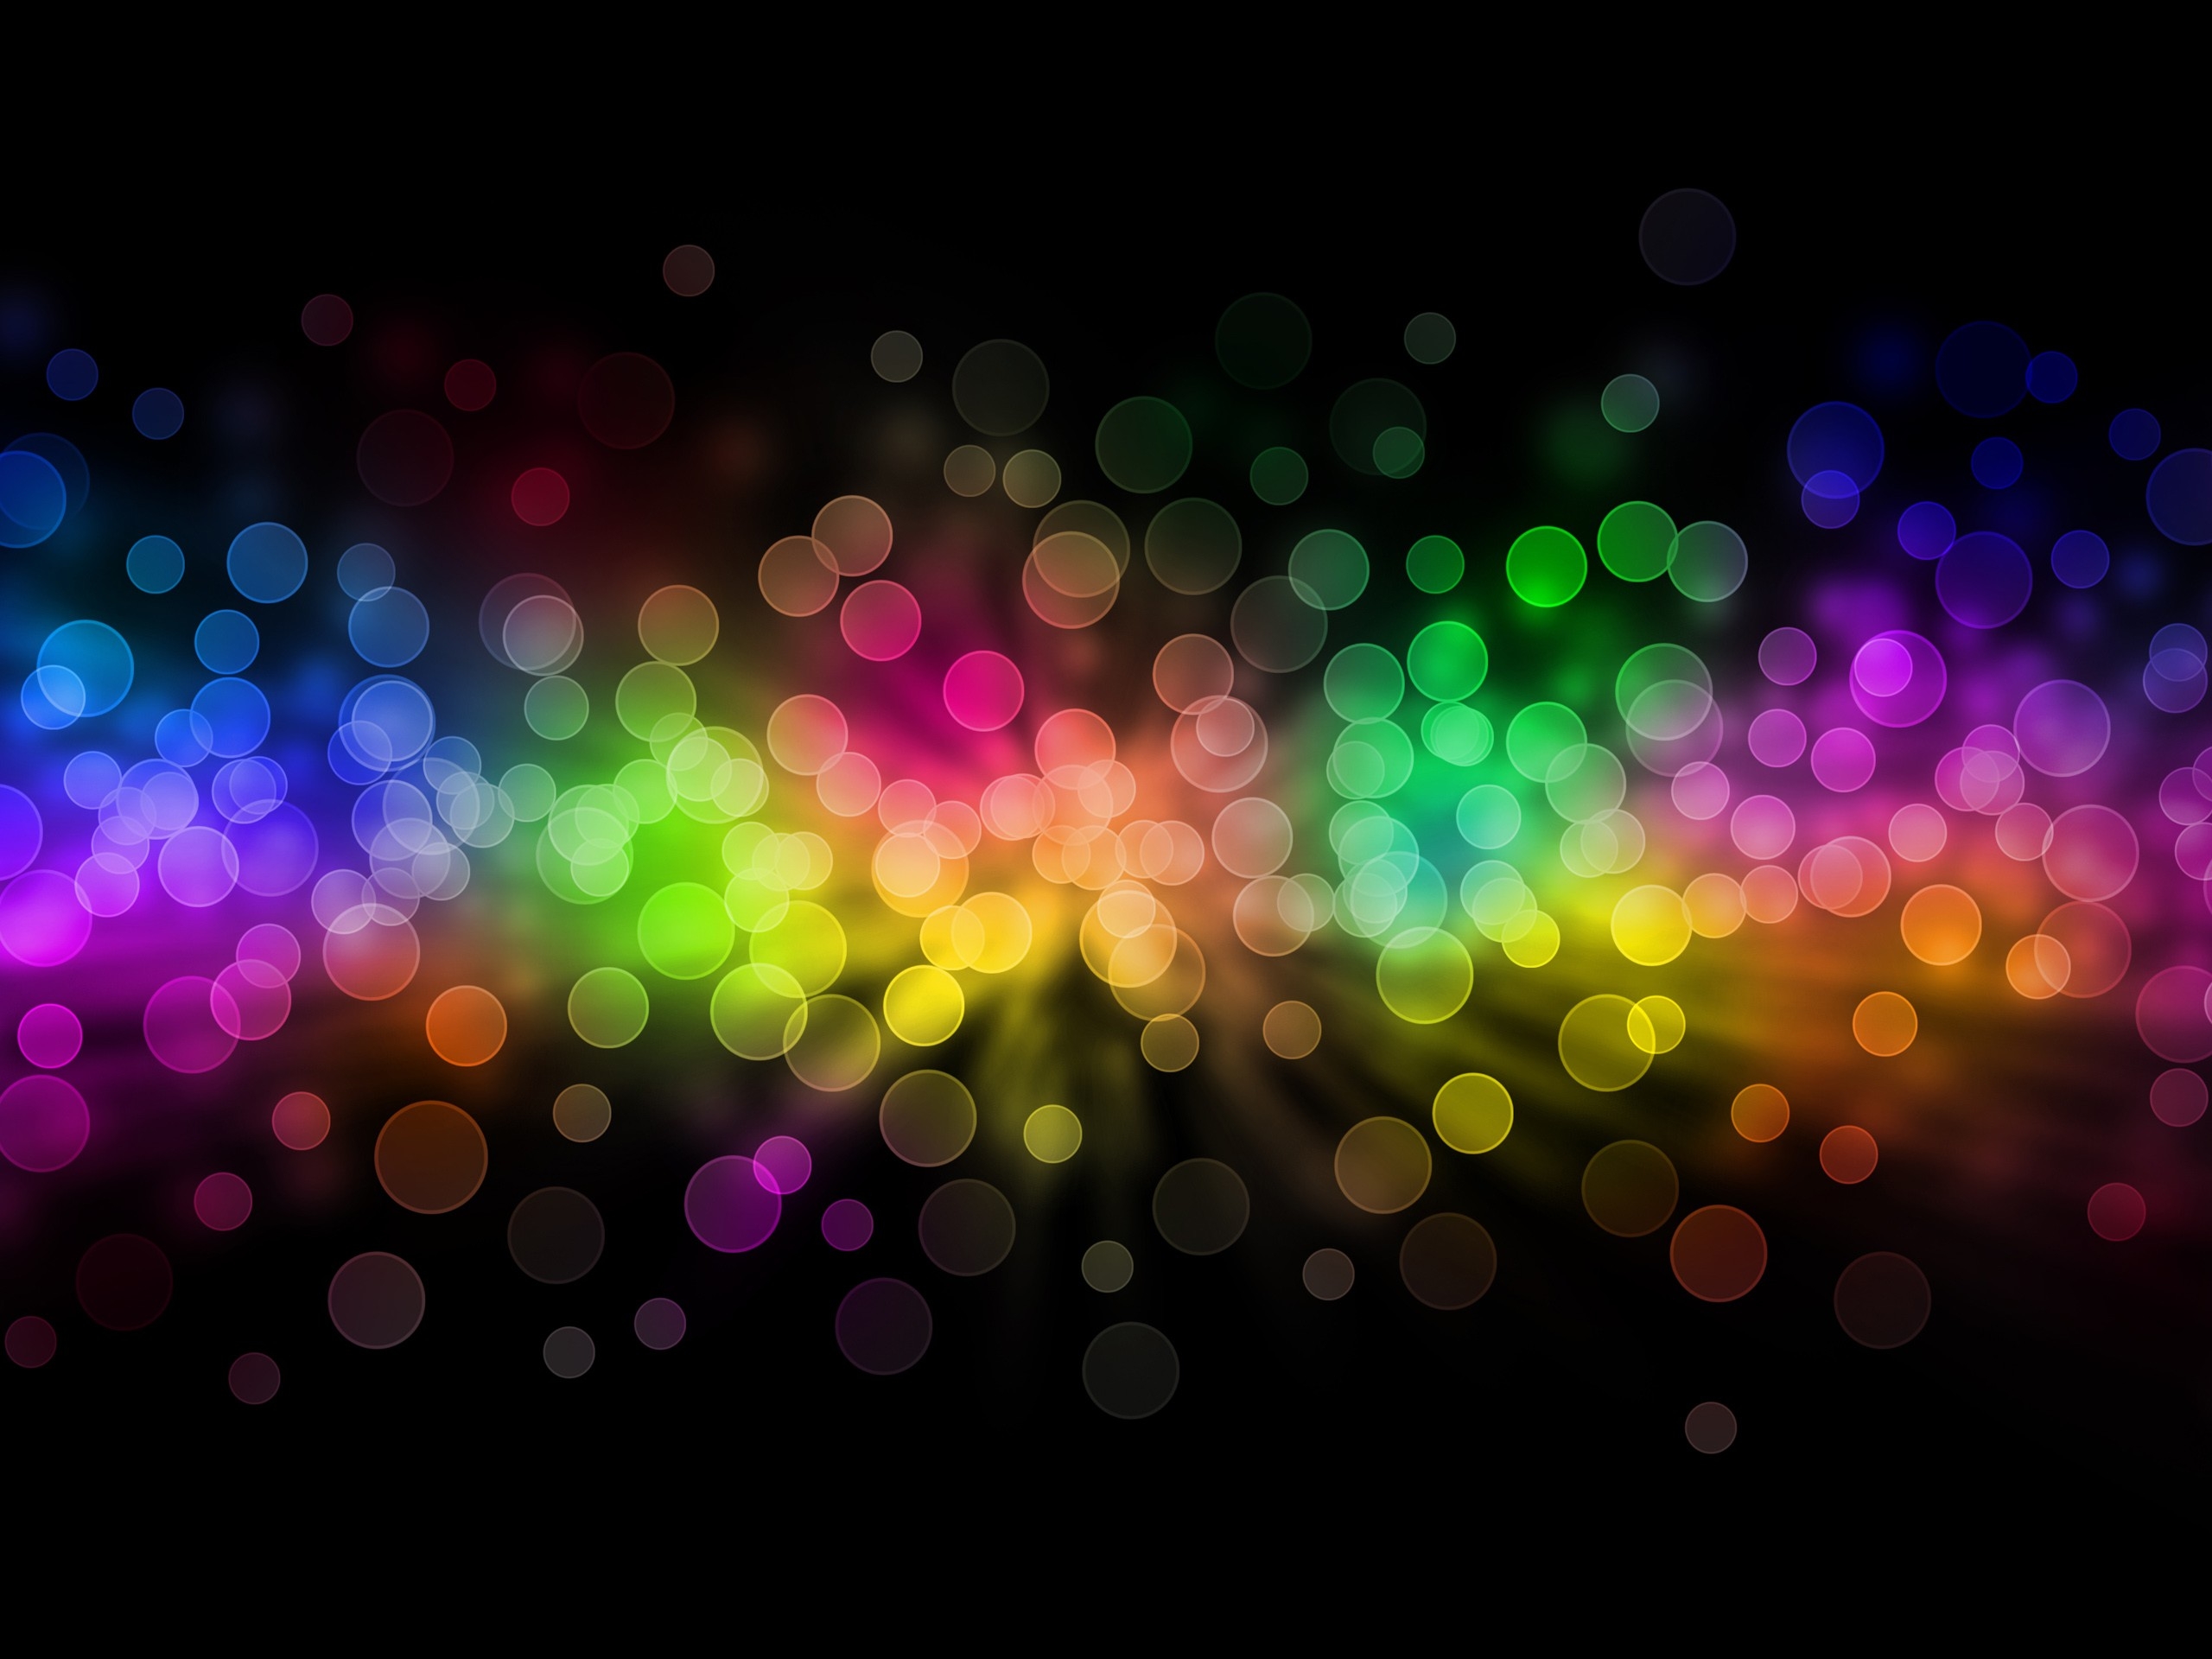 Windows Backgrounds rainbow, background, abstract, glare, circles, iridescent